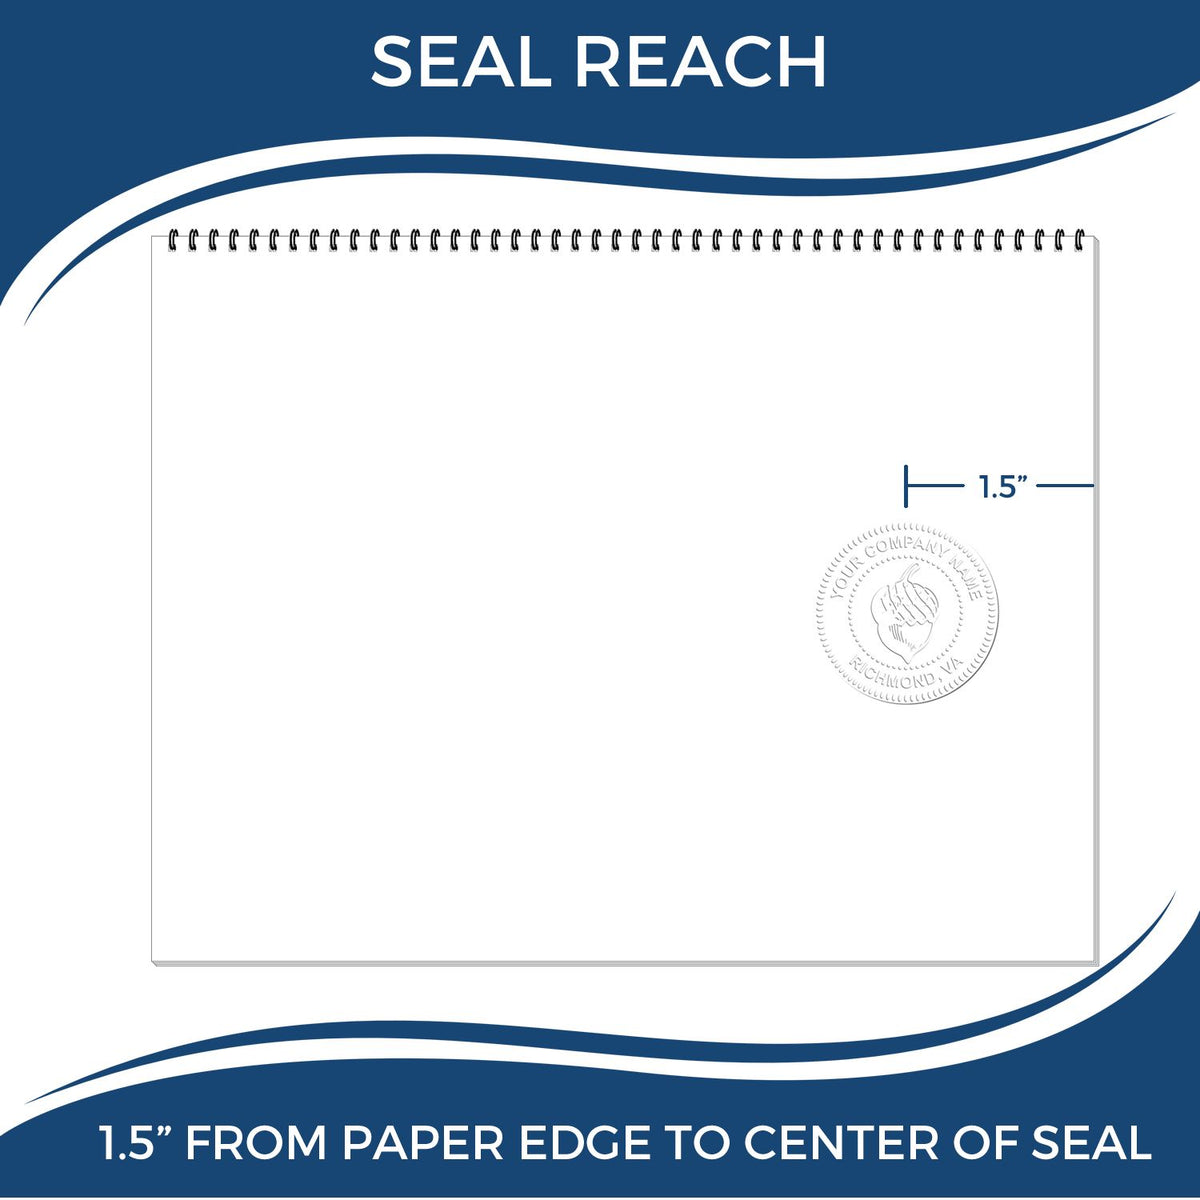 An infographic showing the seal reach which is represented by a ruler and a miniature seal image of the Hybrid District of Columbia Land Surveyor Seal